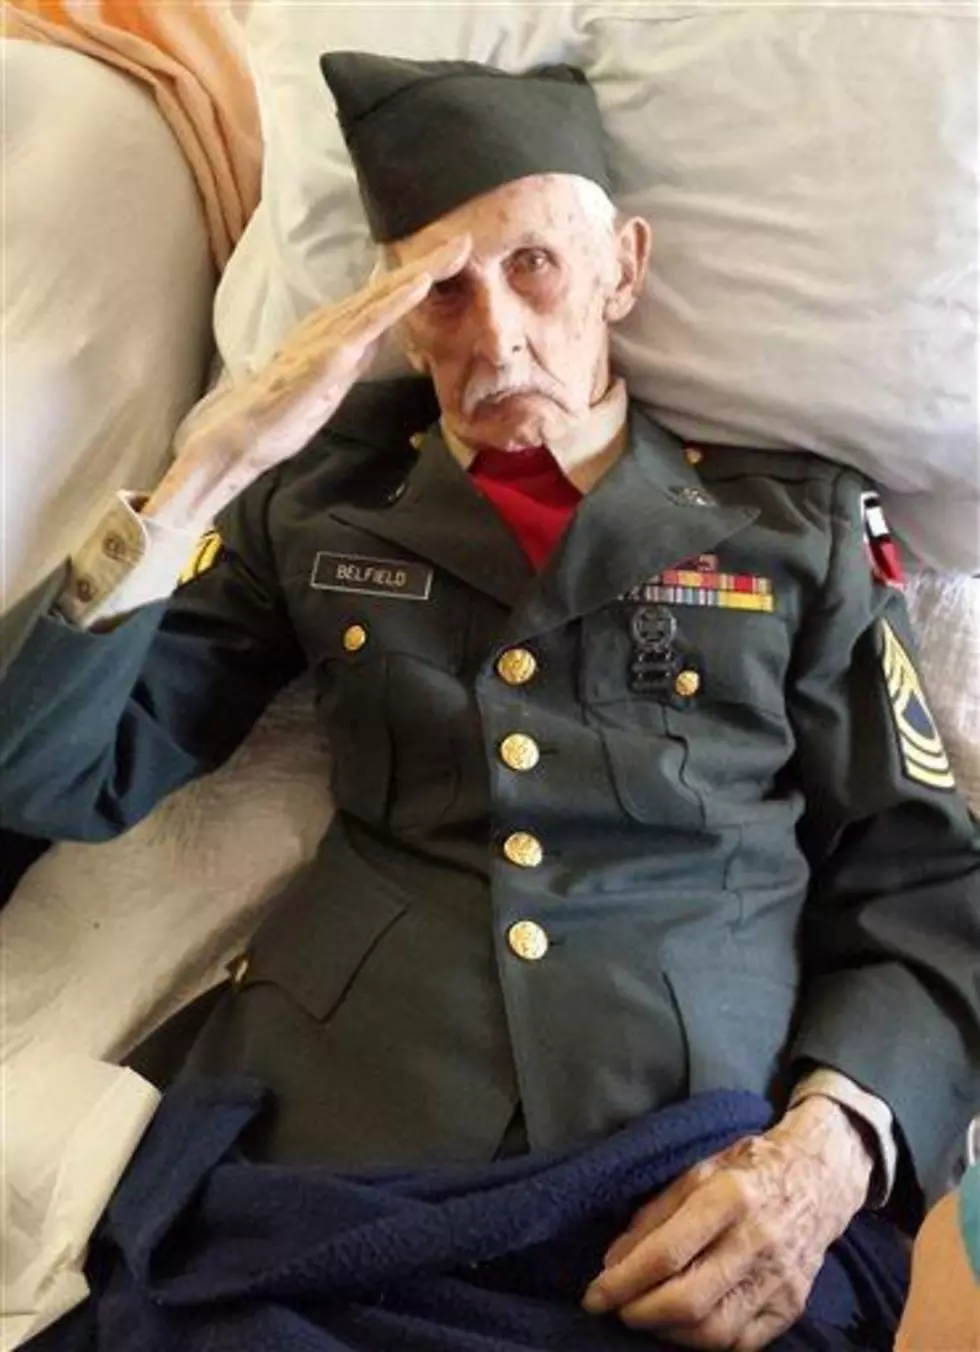 WWII vet, 98, wore uniform for final salute before dying